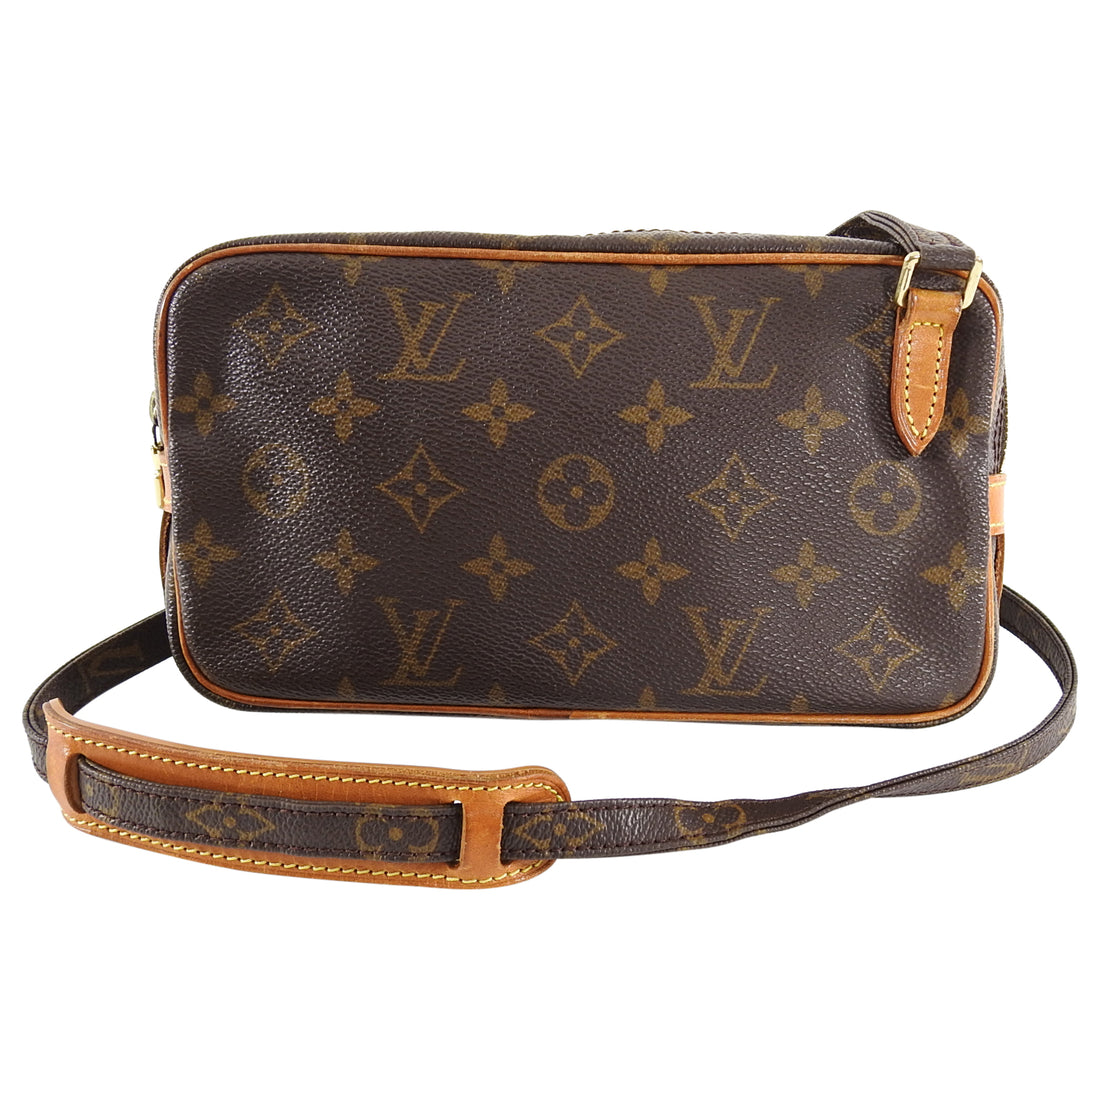 Best Louis Vuitton Vintage Monogram Marly Crossbody for sale in Las Vegas,  Nevada for 2023